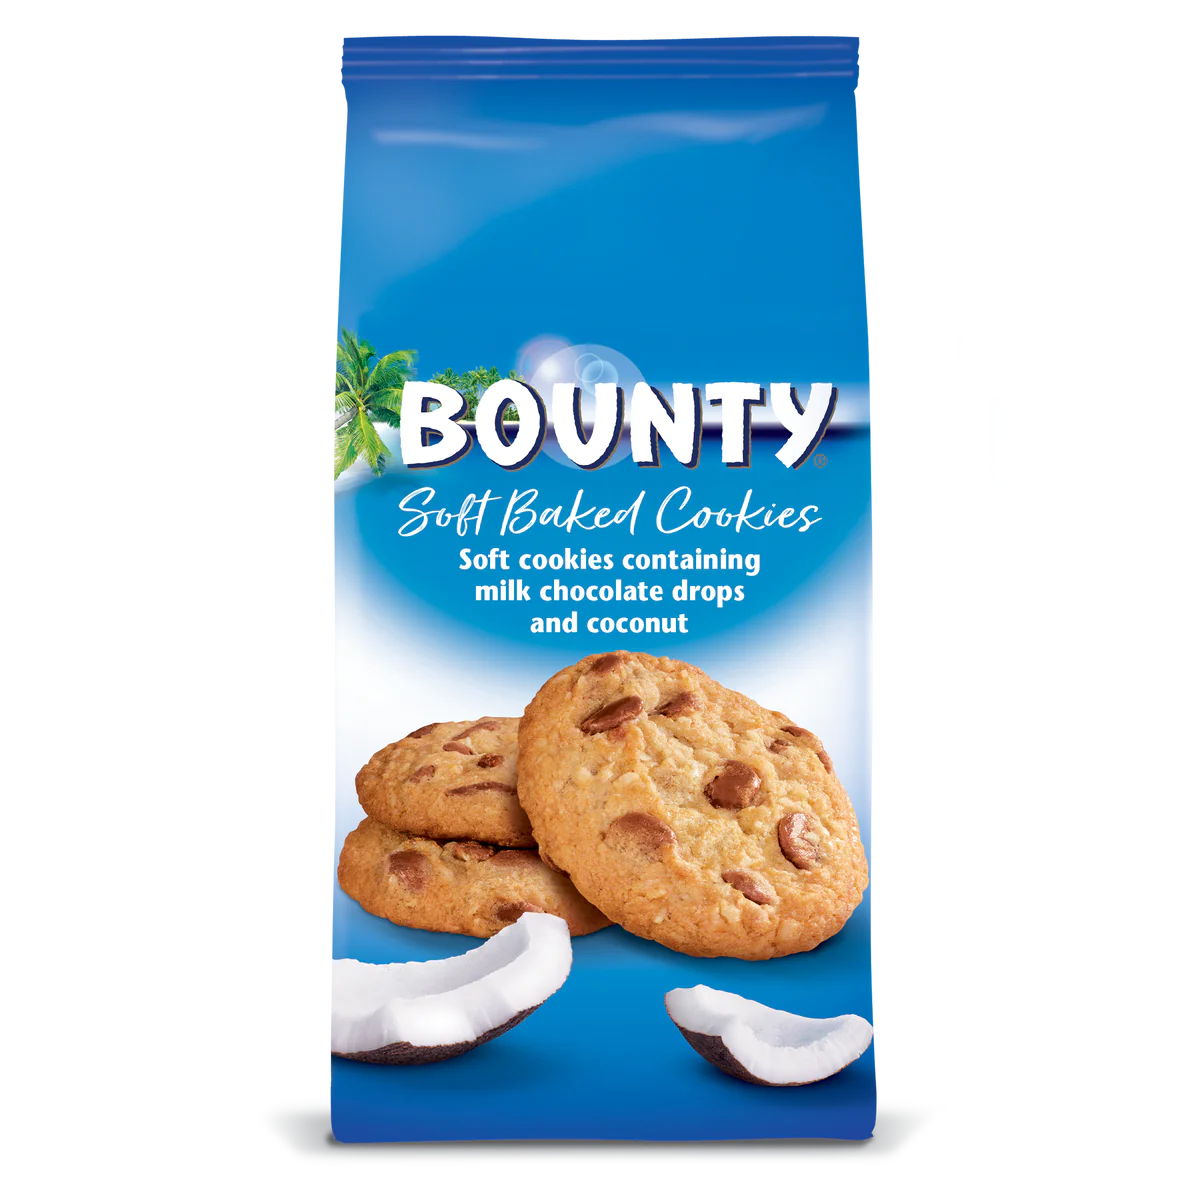 Bounty Soft Baked Cookies